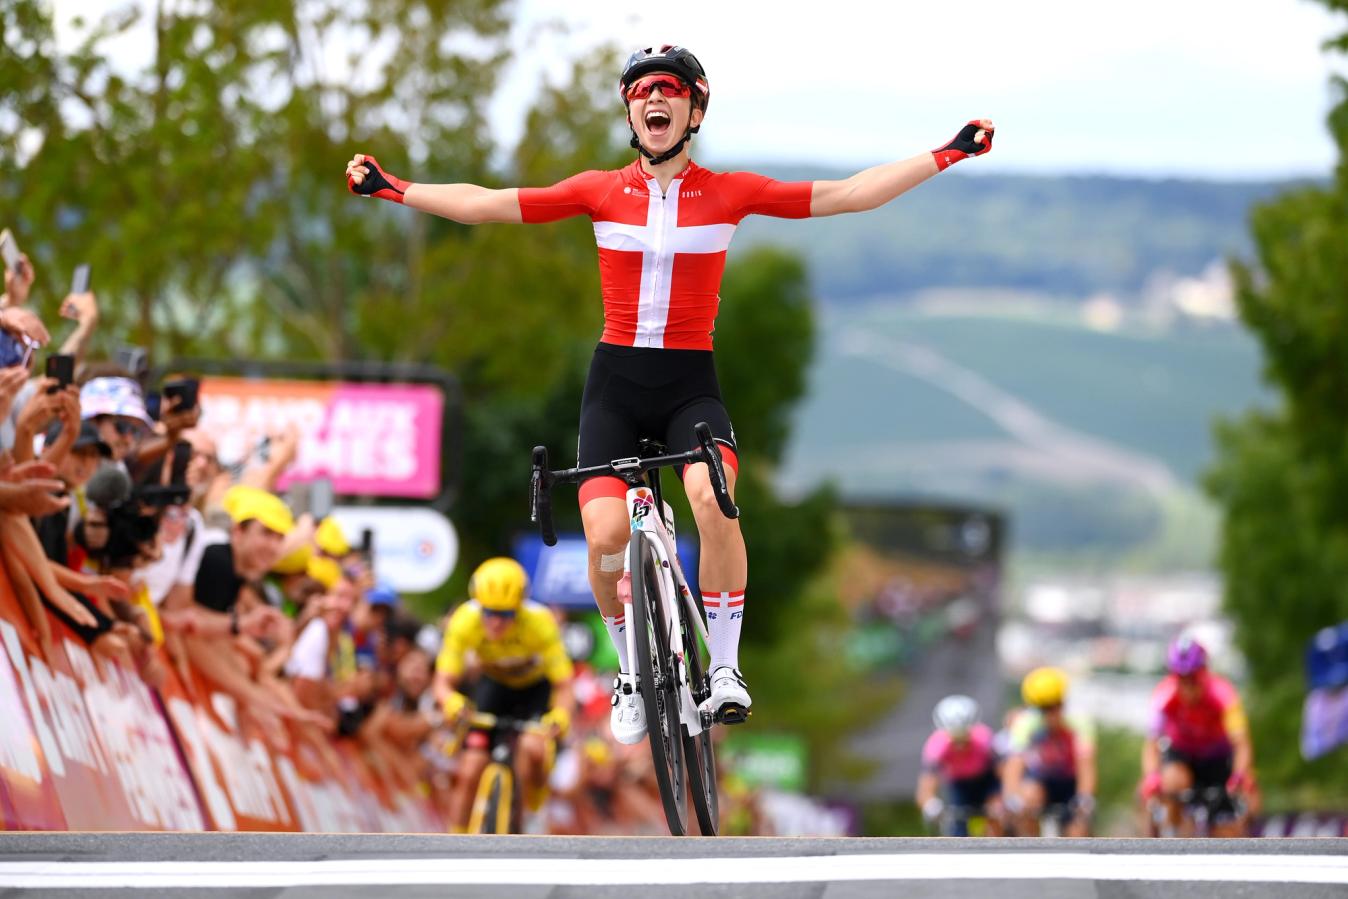 Cecilie Uttrup Ludwig took a memorable victory on stage 3 of the 2022 Tour de France Femmes